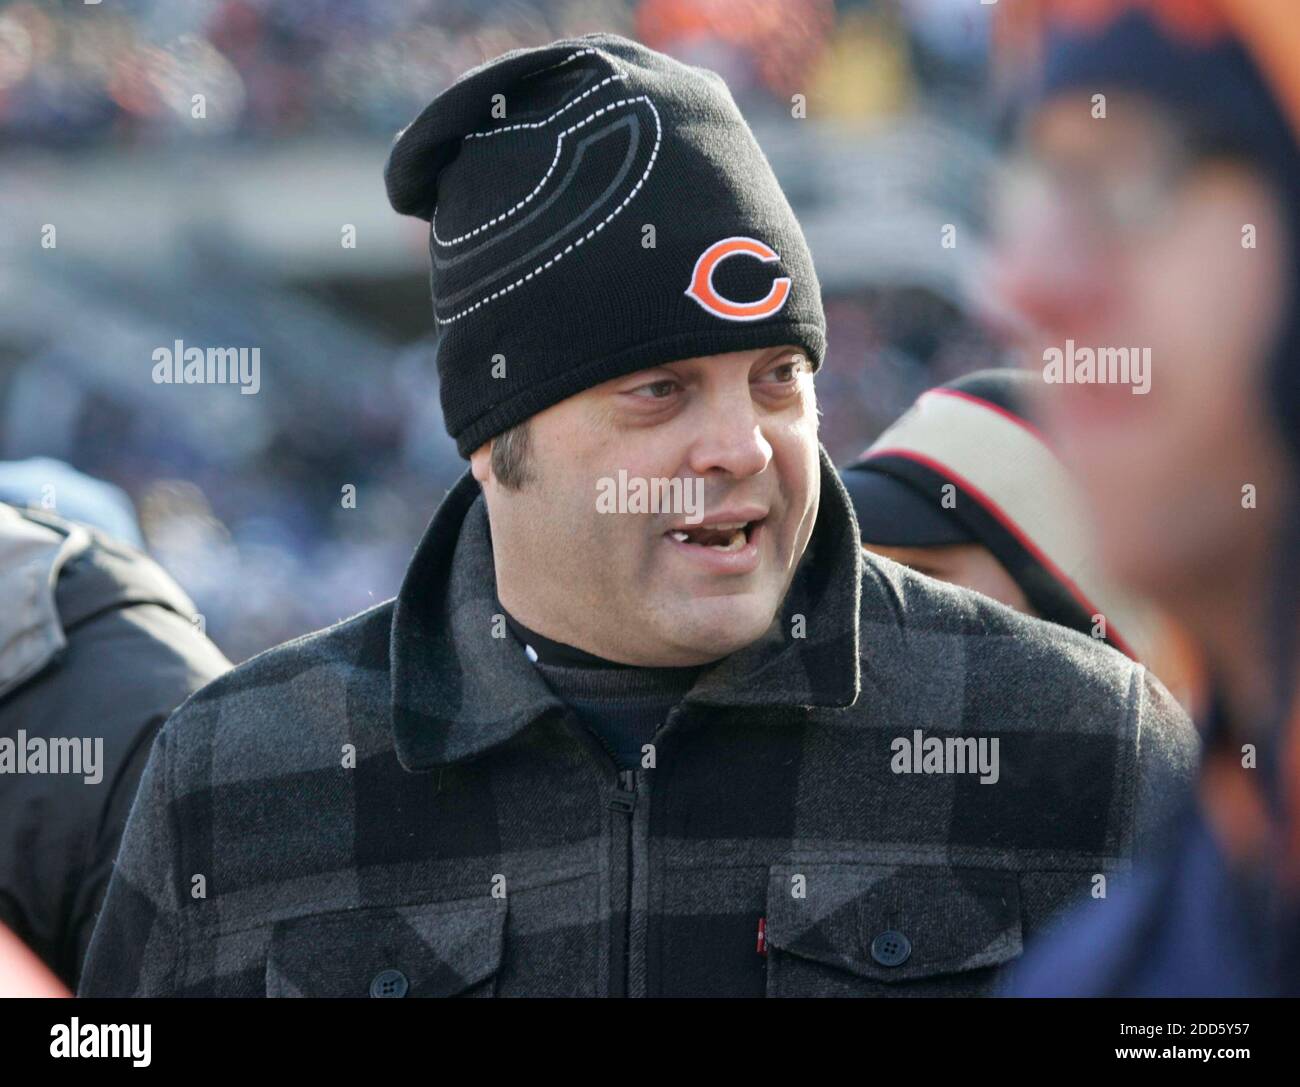 NO FILM, NO VIDEO, NO TV, NO DOCUMENTARY - Actor Vince Vaughn stands on the sideline before the NFC Championship game between the Green Bay Packers and the Chicago Bears at Soldier Field in Chicago, IL, USA on January 23, 2011. Photo by Mike De Sisti/Milwaukee Journal Sentinel/MCT/ABACAPRESS.COM Stock Photo